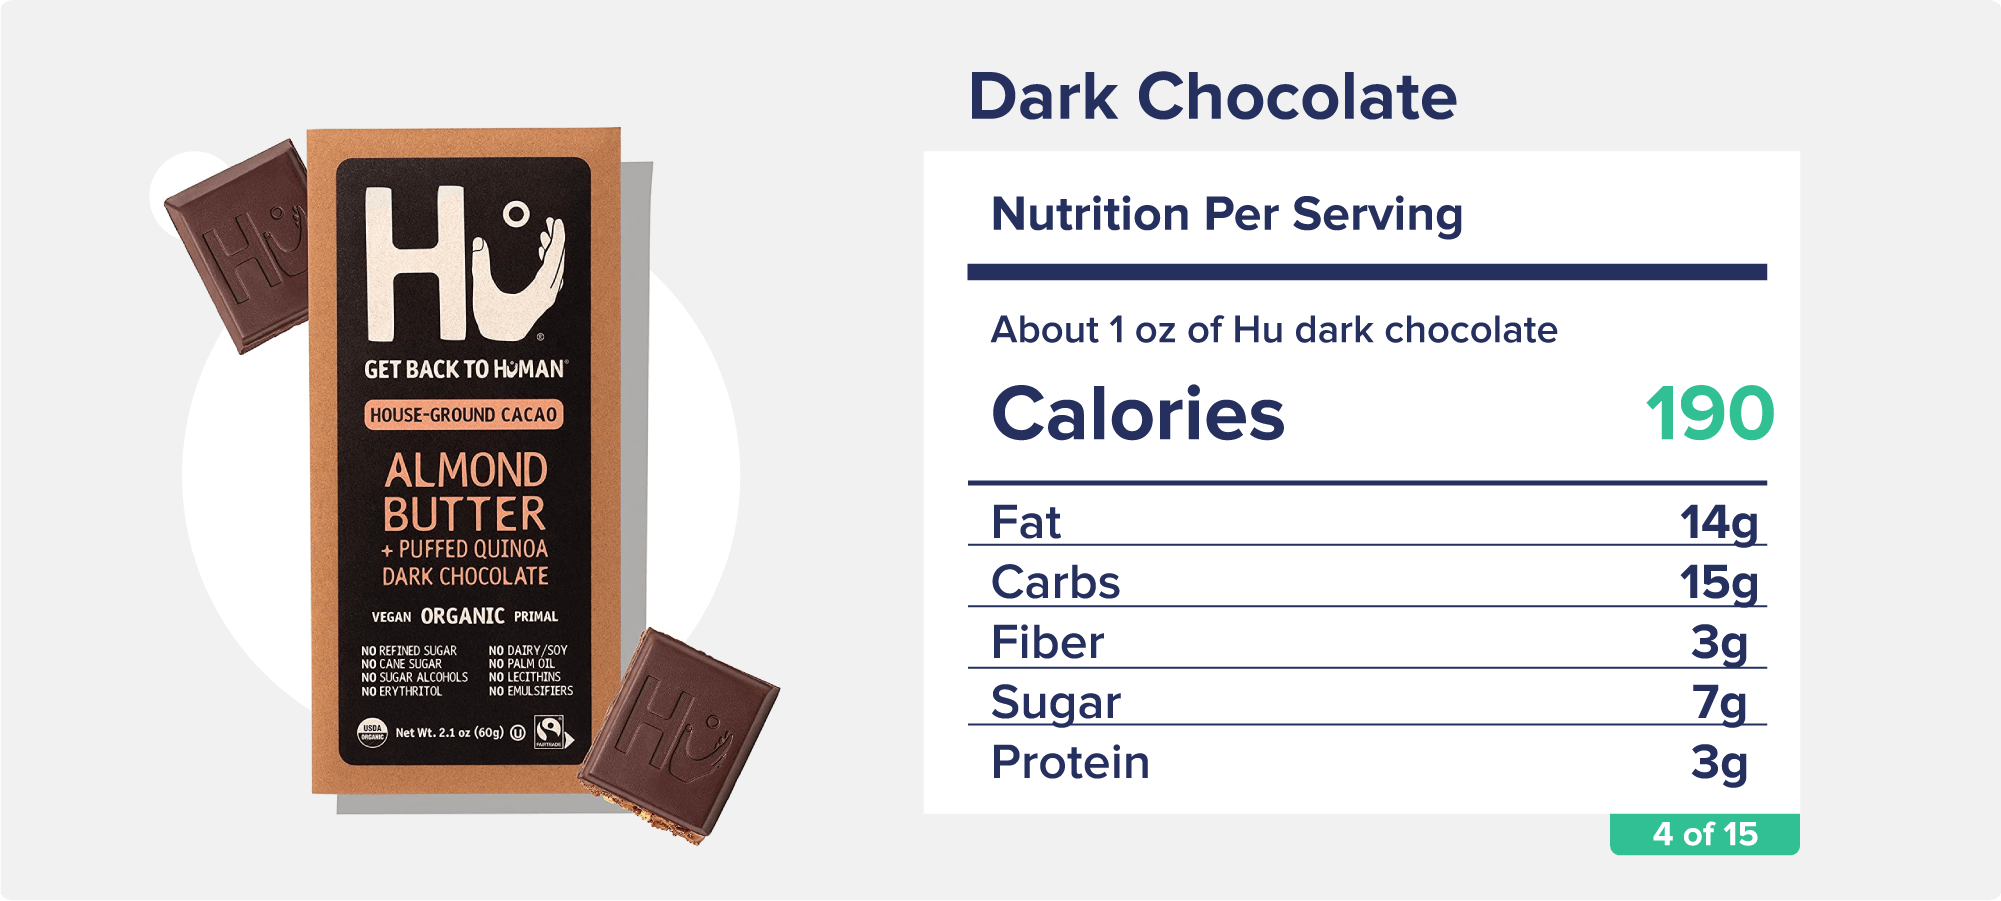 A wrapped HU Dark Chocolate bar with some additional chocolate squares pictured outside the wrapper, along with accompanying nutrition facts like calories, fat, and protein.